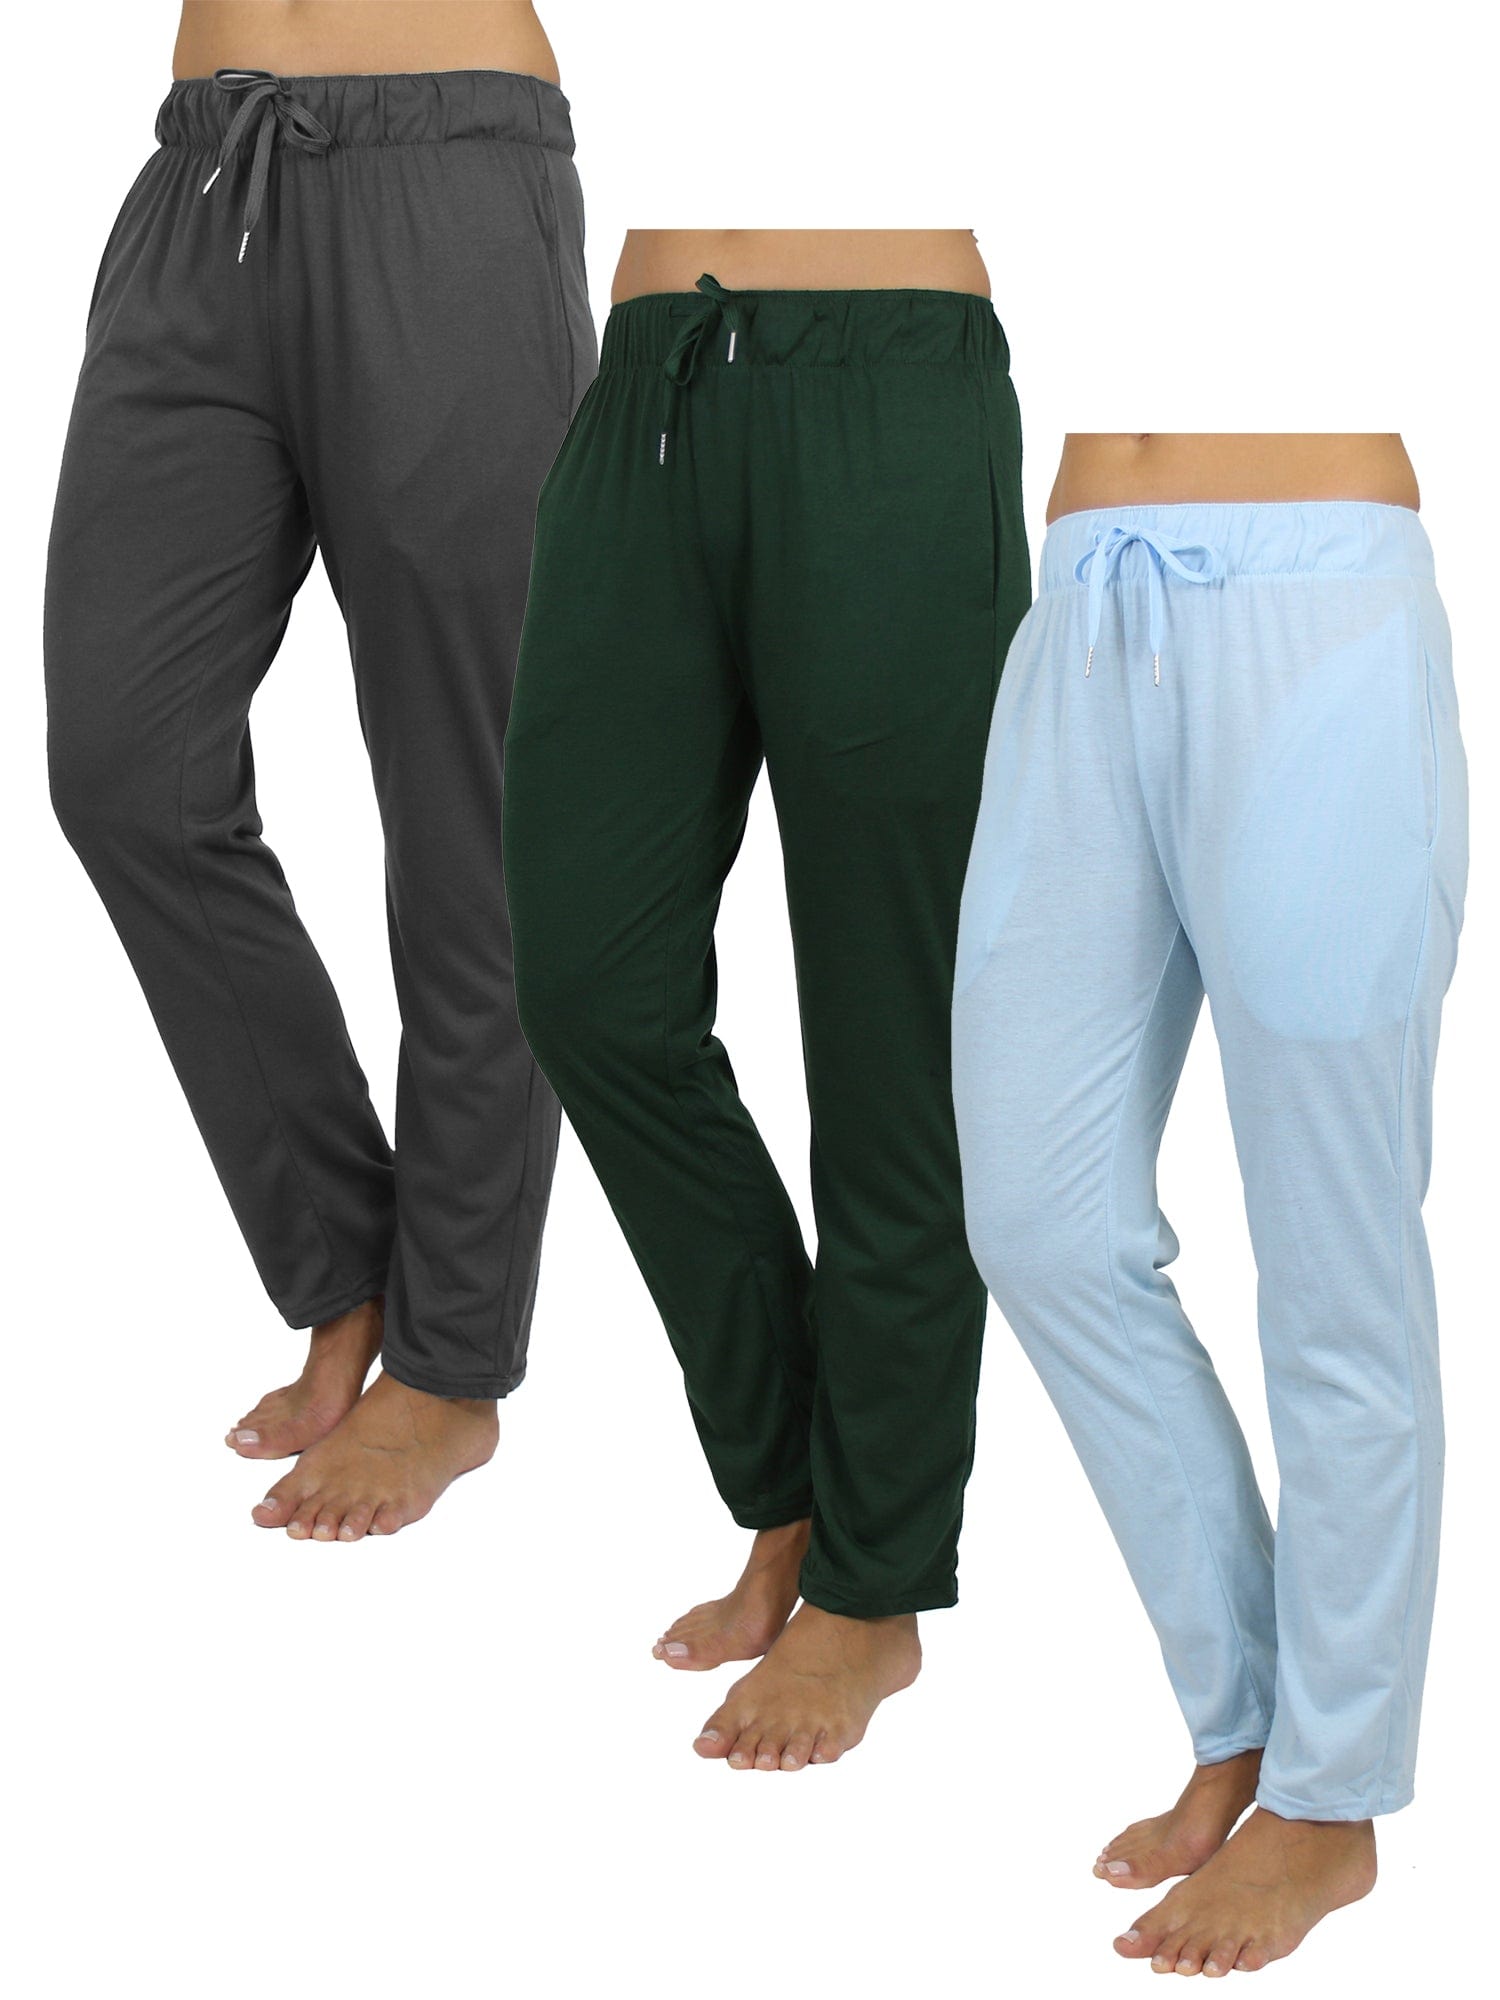 Women's 3 Pack Loose Fit Classic Lounge Pants (Sizes, S-3XL) - GalaxybyHarvic